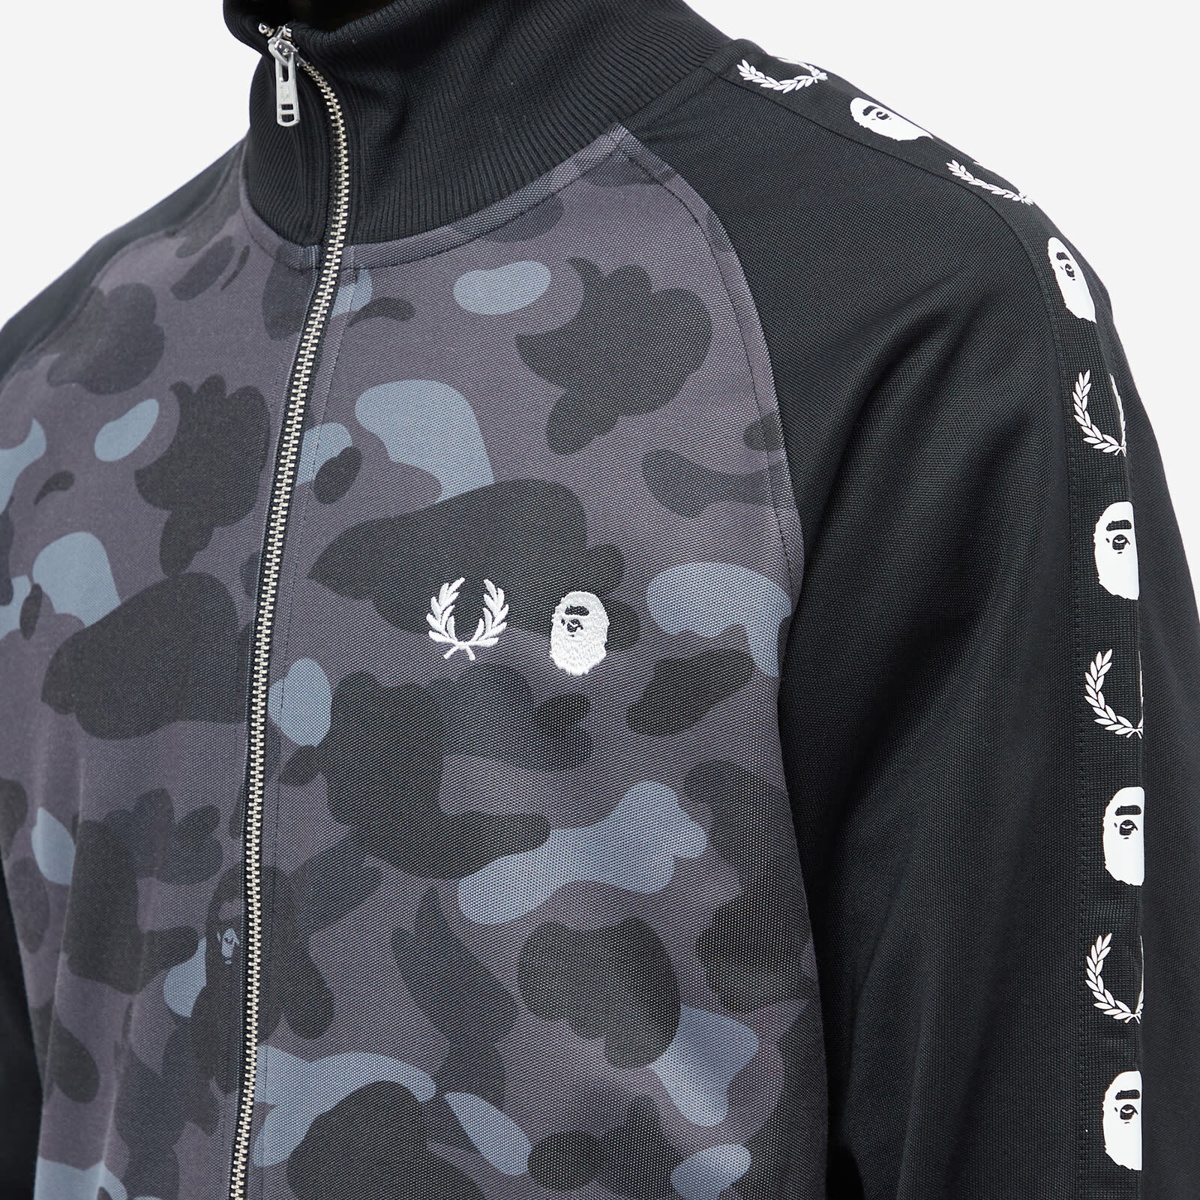 Fred Perry x BAPE Camo Track Jacket in Black